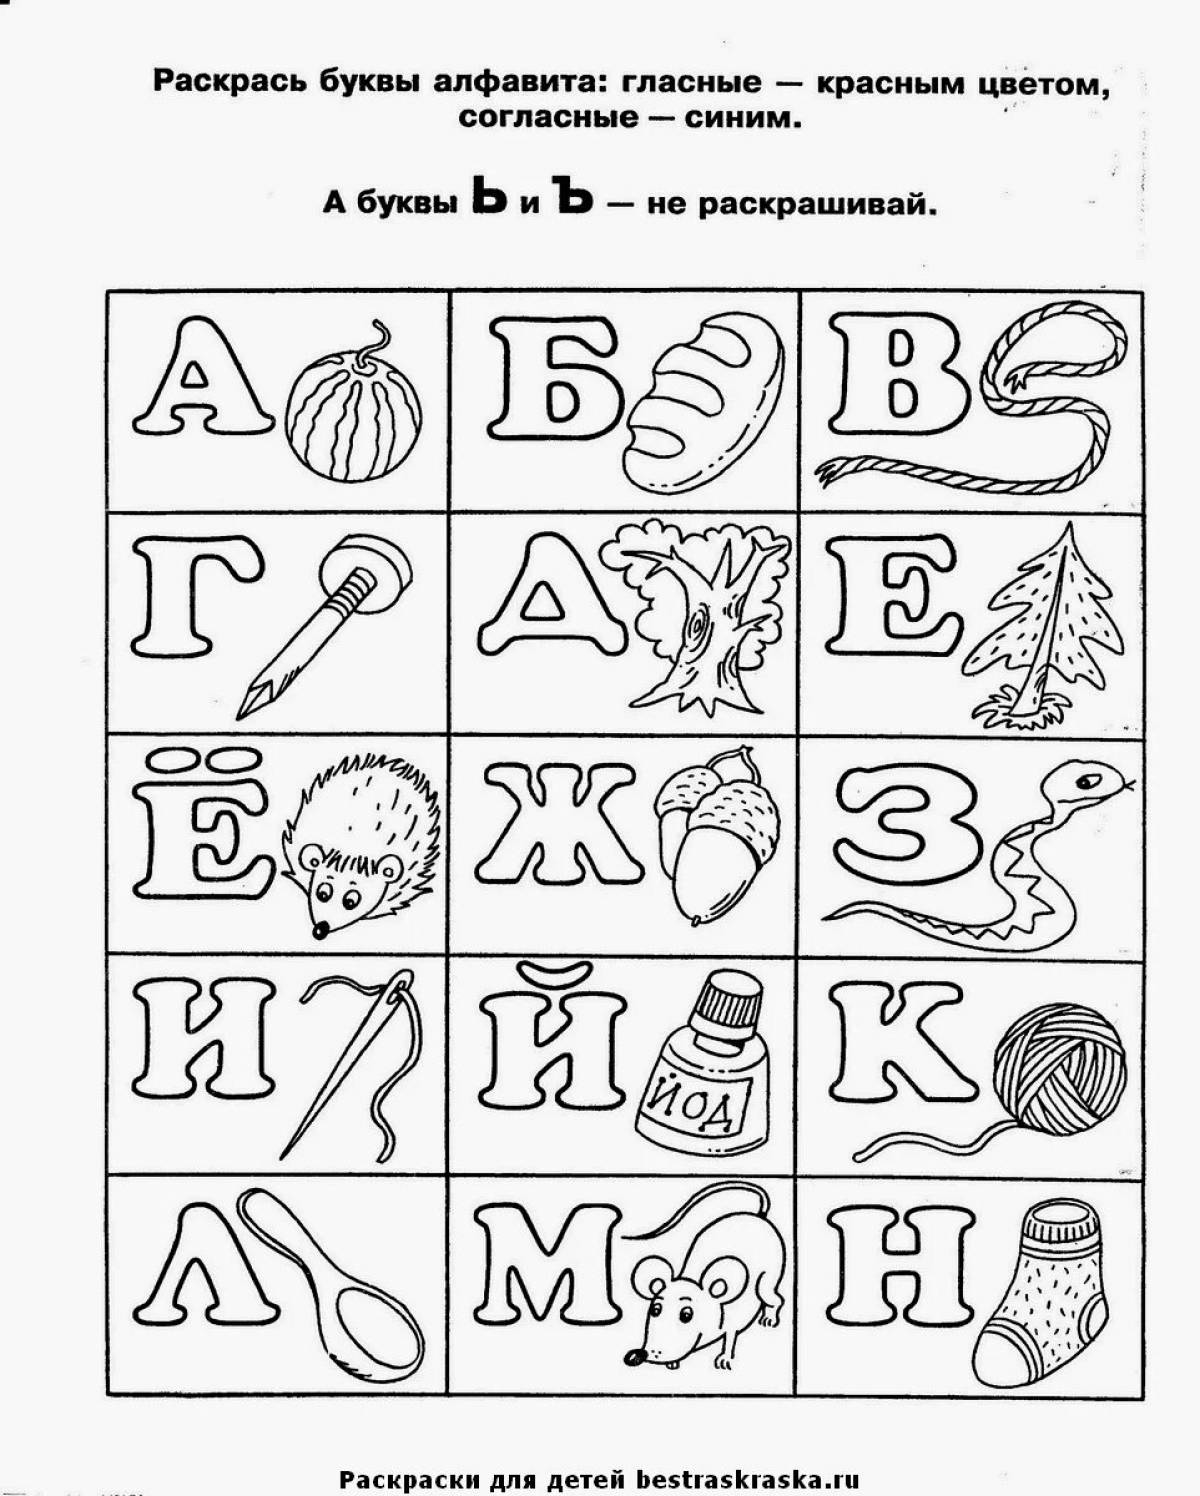 Russian printed alphabet all 33 letters #14